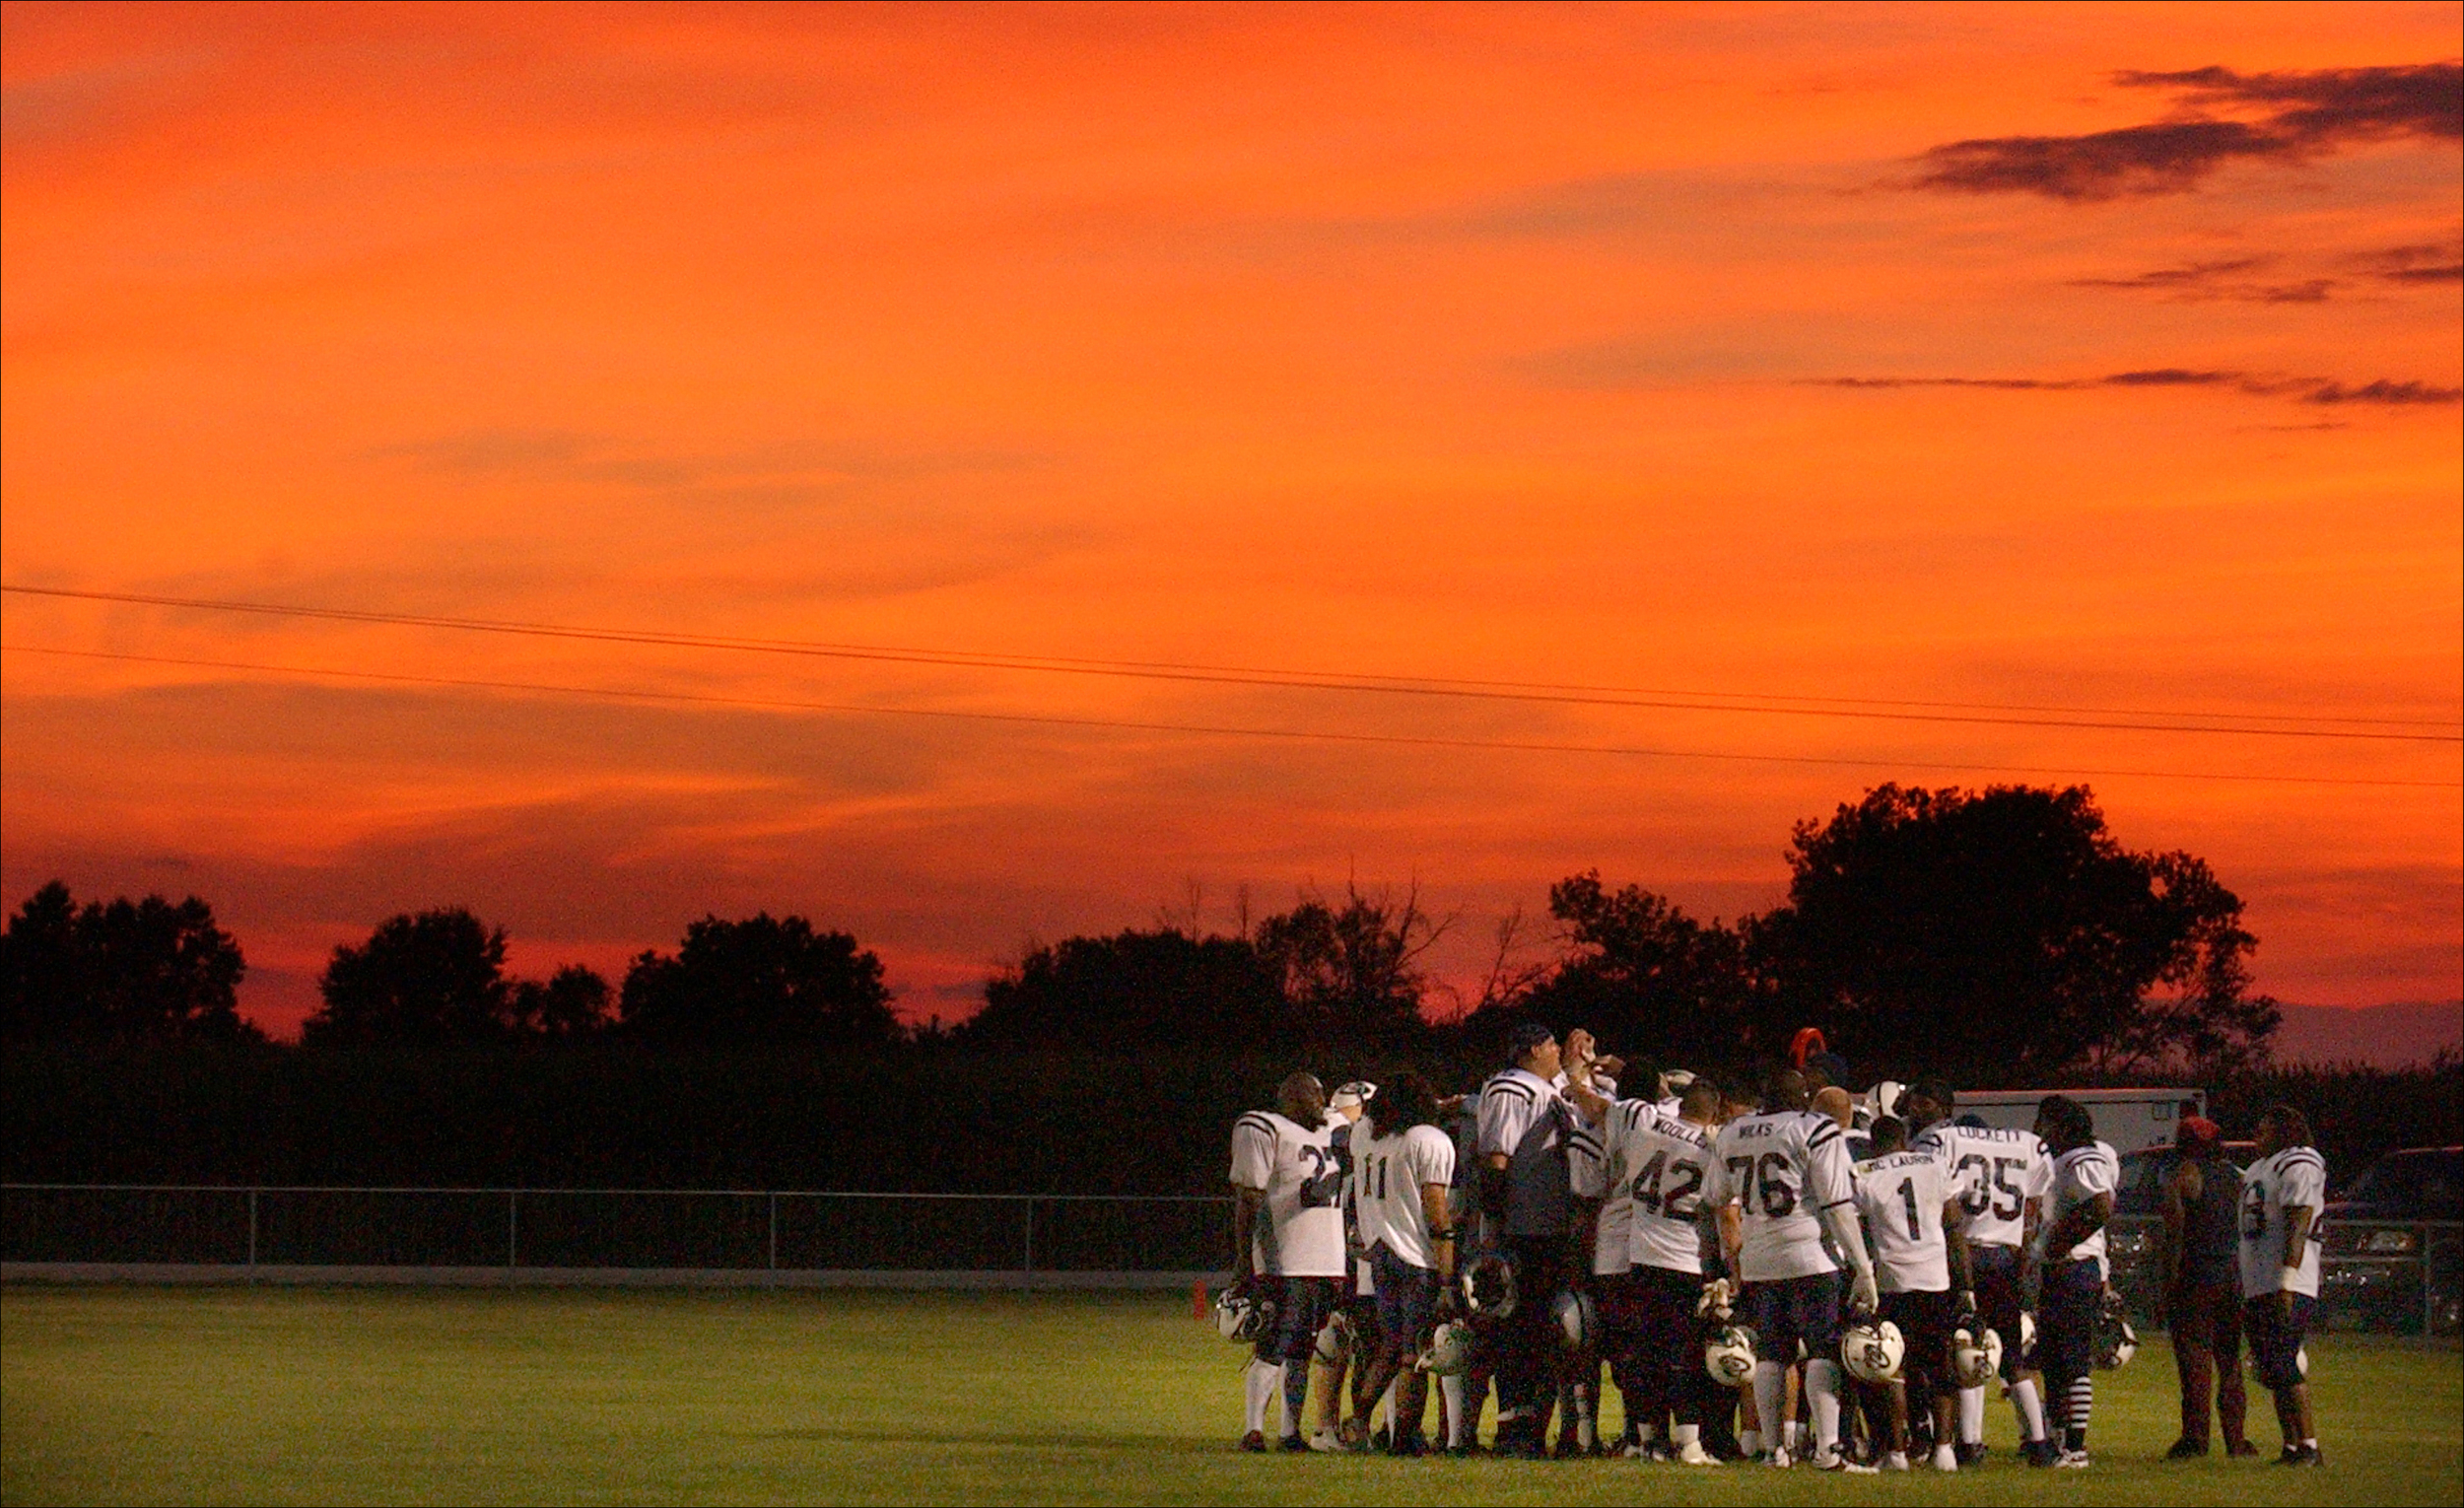  Members of the Northeast Missouri Cyclones briefly went over their strategy for the second half of their game at the Van-Far High School football field in Vandalia, Mo. where temperatures eased down under an orange, summer sky. The minor league foot